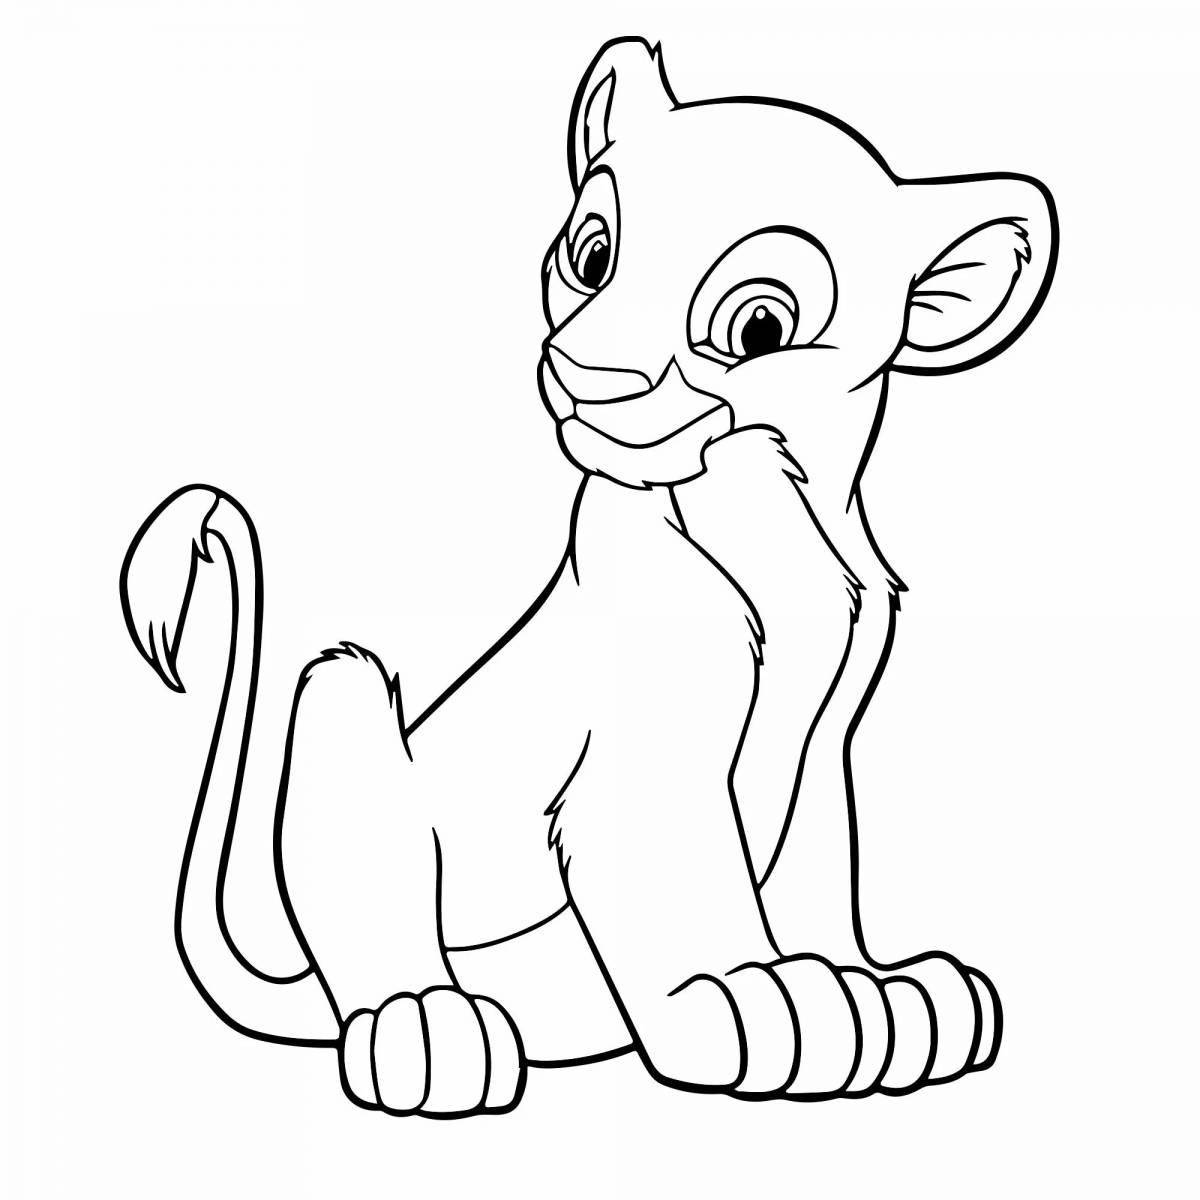 Great lion king coloring book for kids